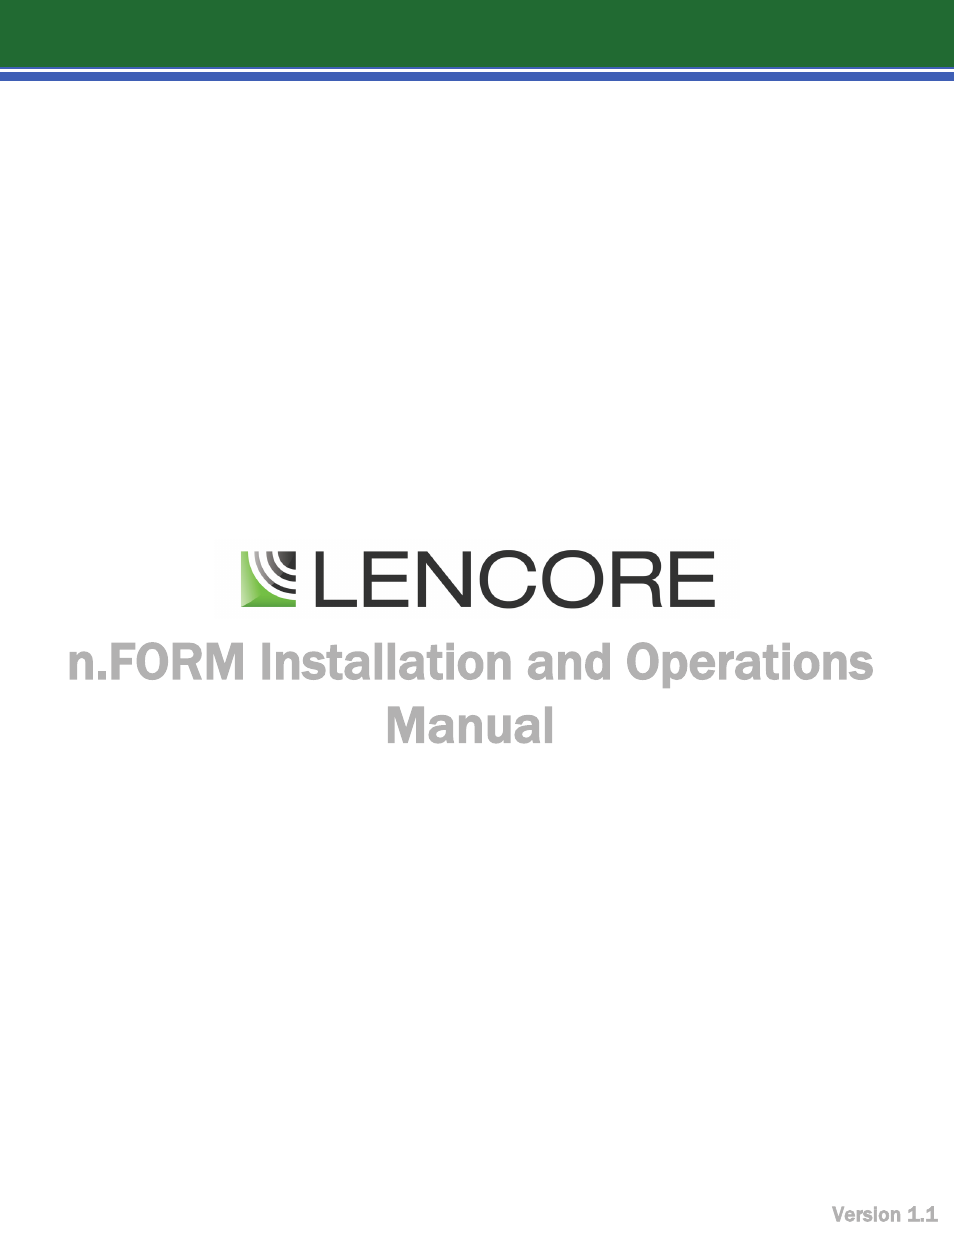 n.Form: Installation and Operations Manual